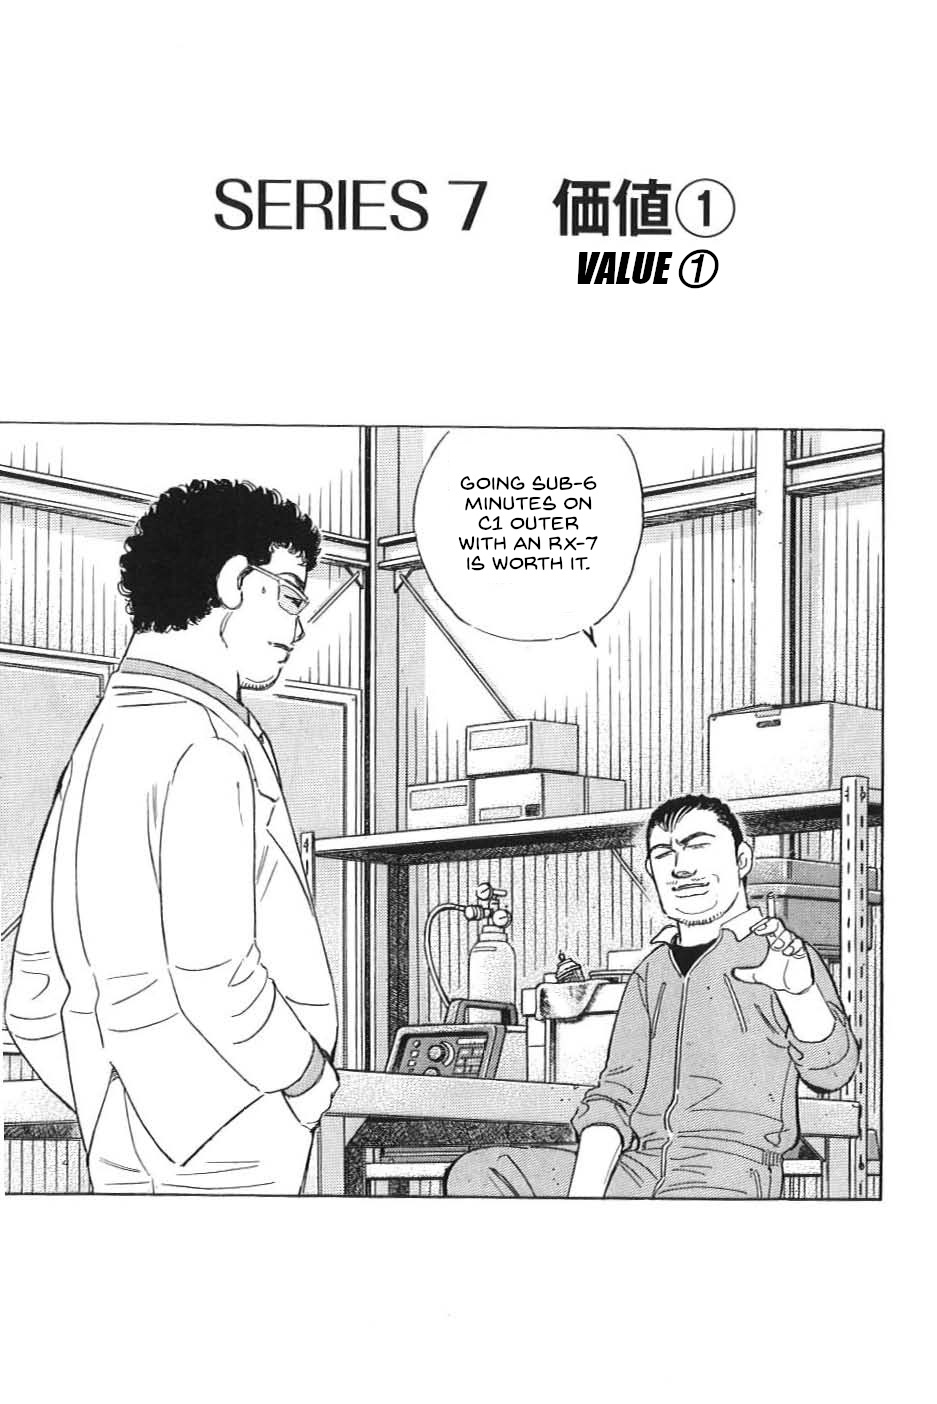 Wangan Midnight: C1 Runner Vol.2 Chapter 22: Value ① - Picture 1